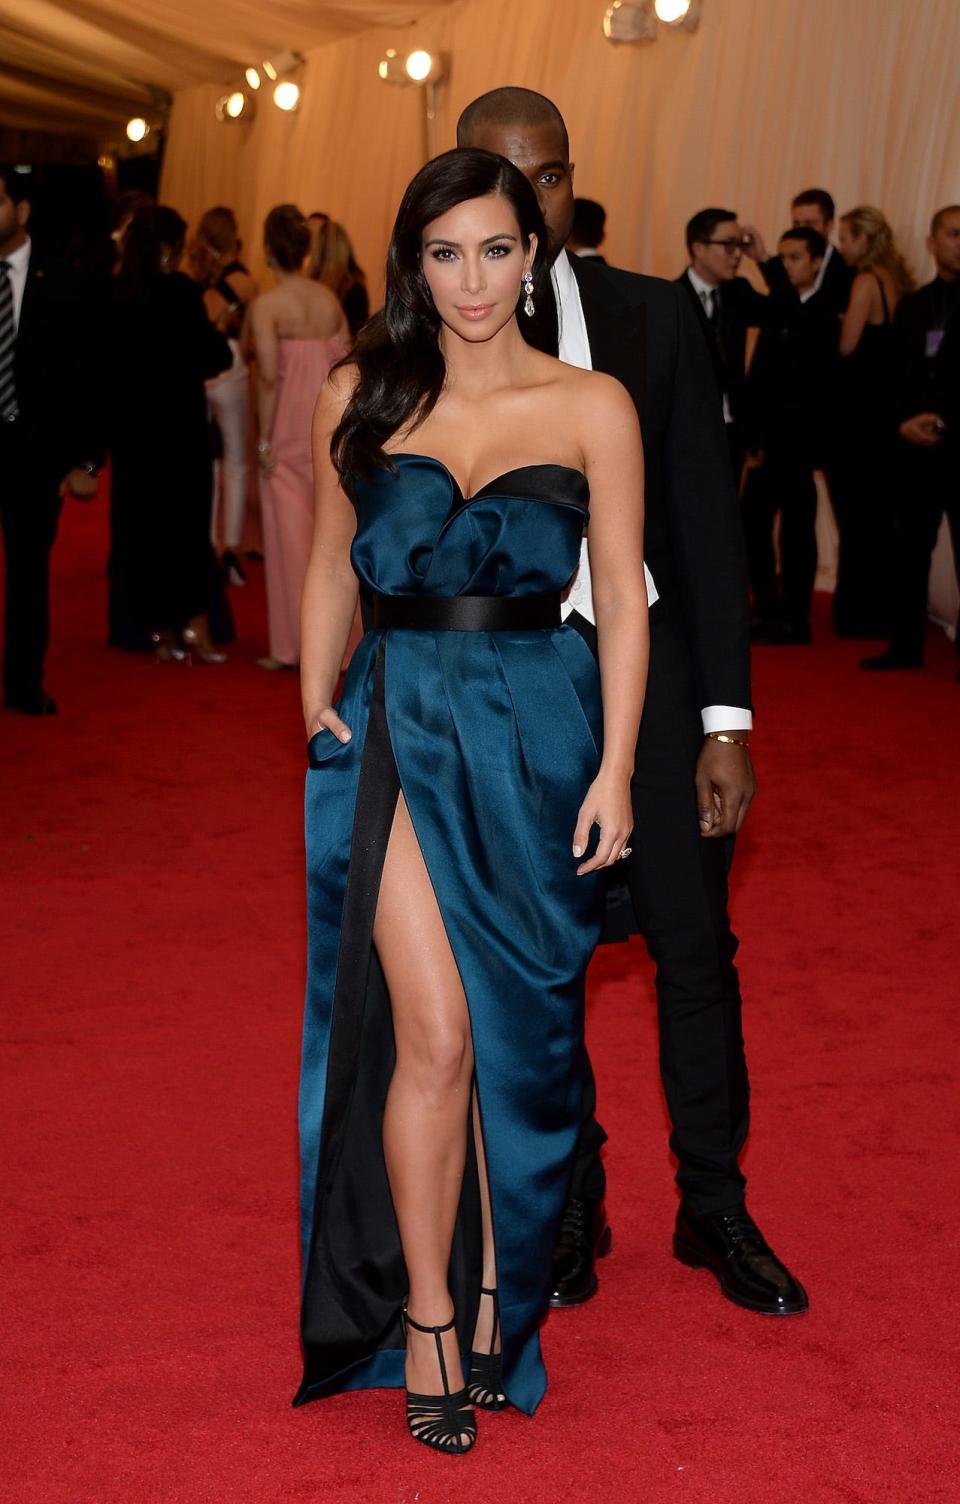 Kim Kardashian on the Met Gala red carpet wearing a blue gown with a thigh-high slit. Her then-husband Kanye West stands directly behind her.